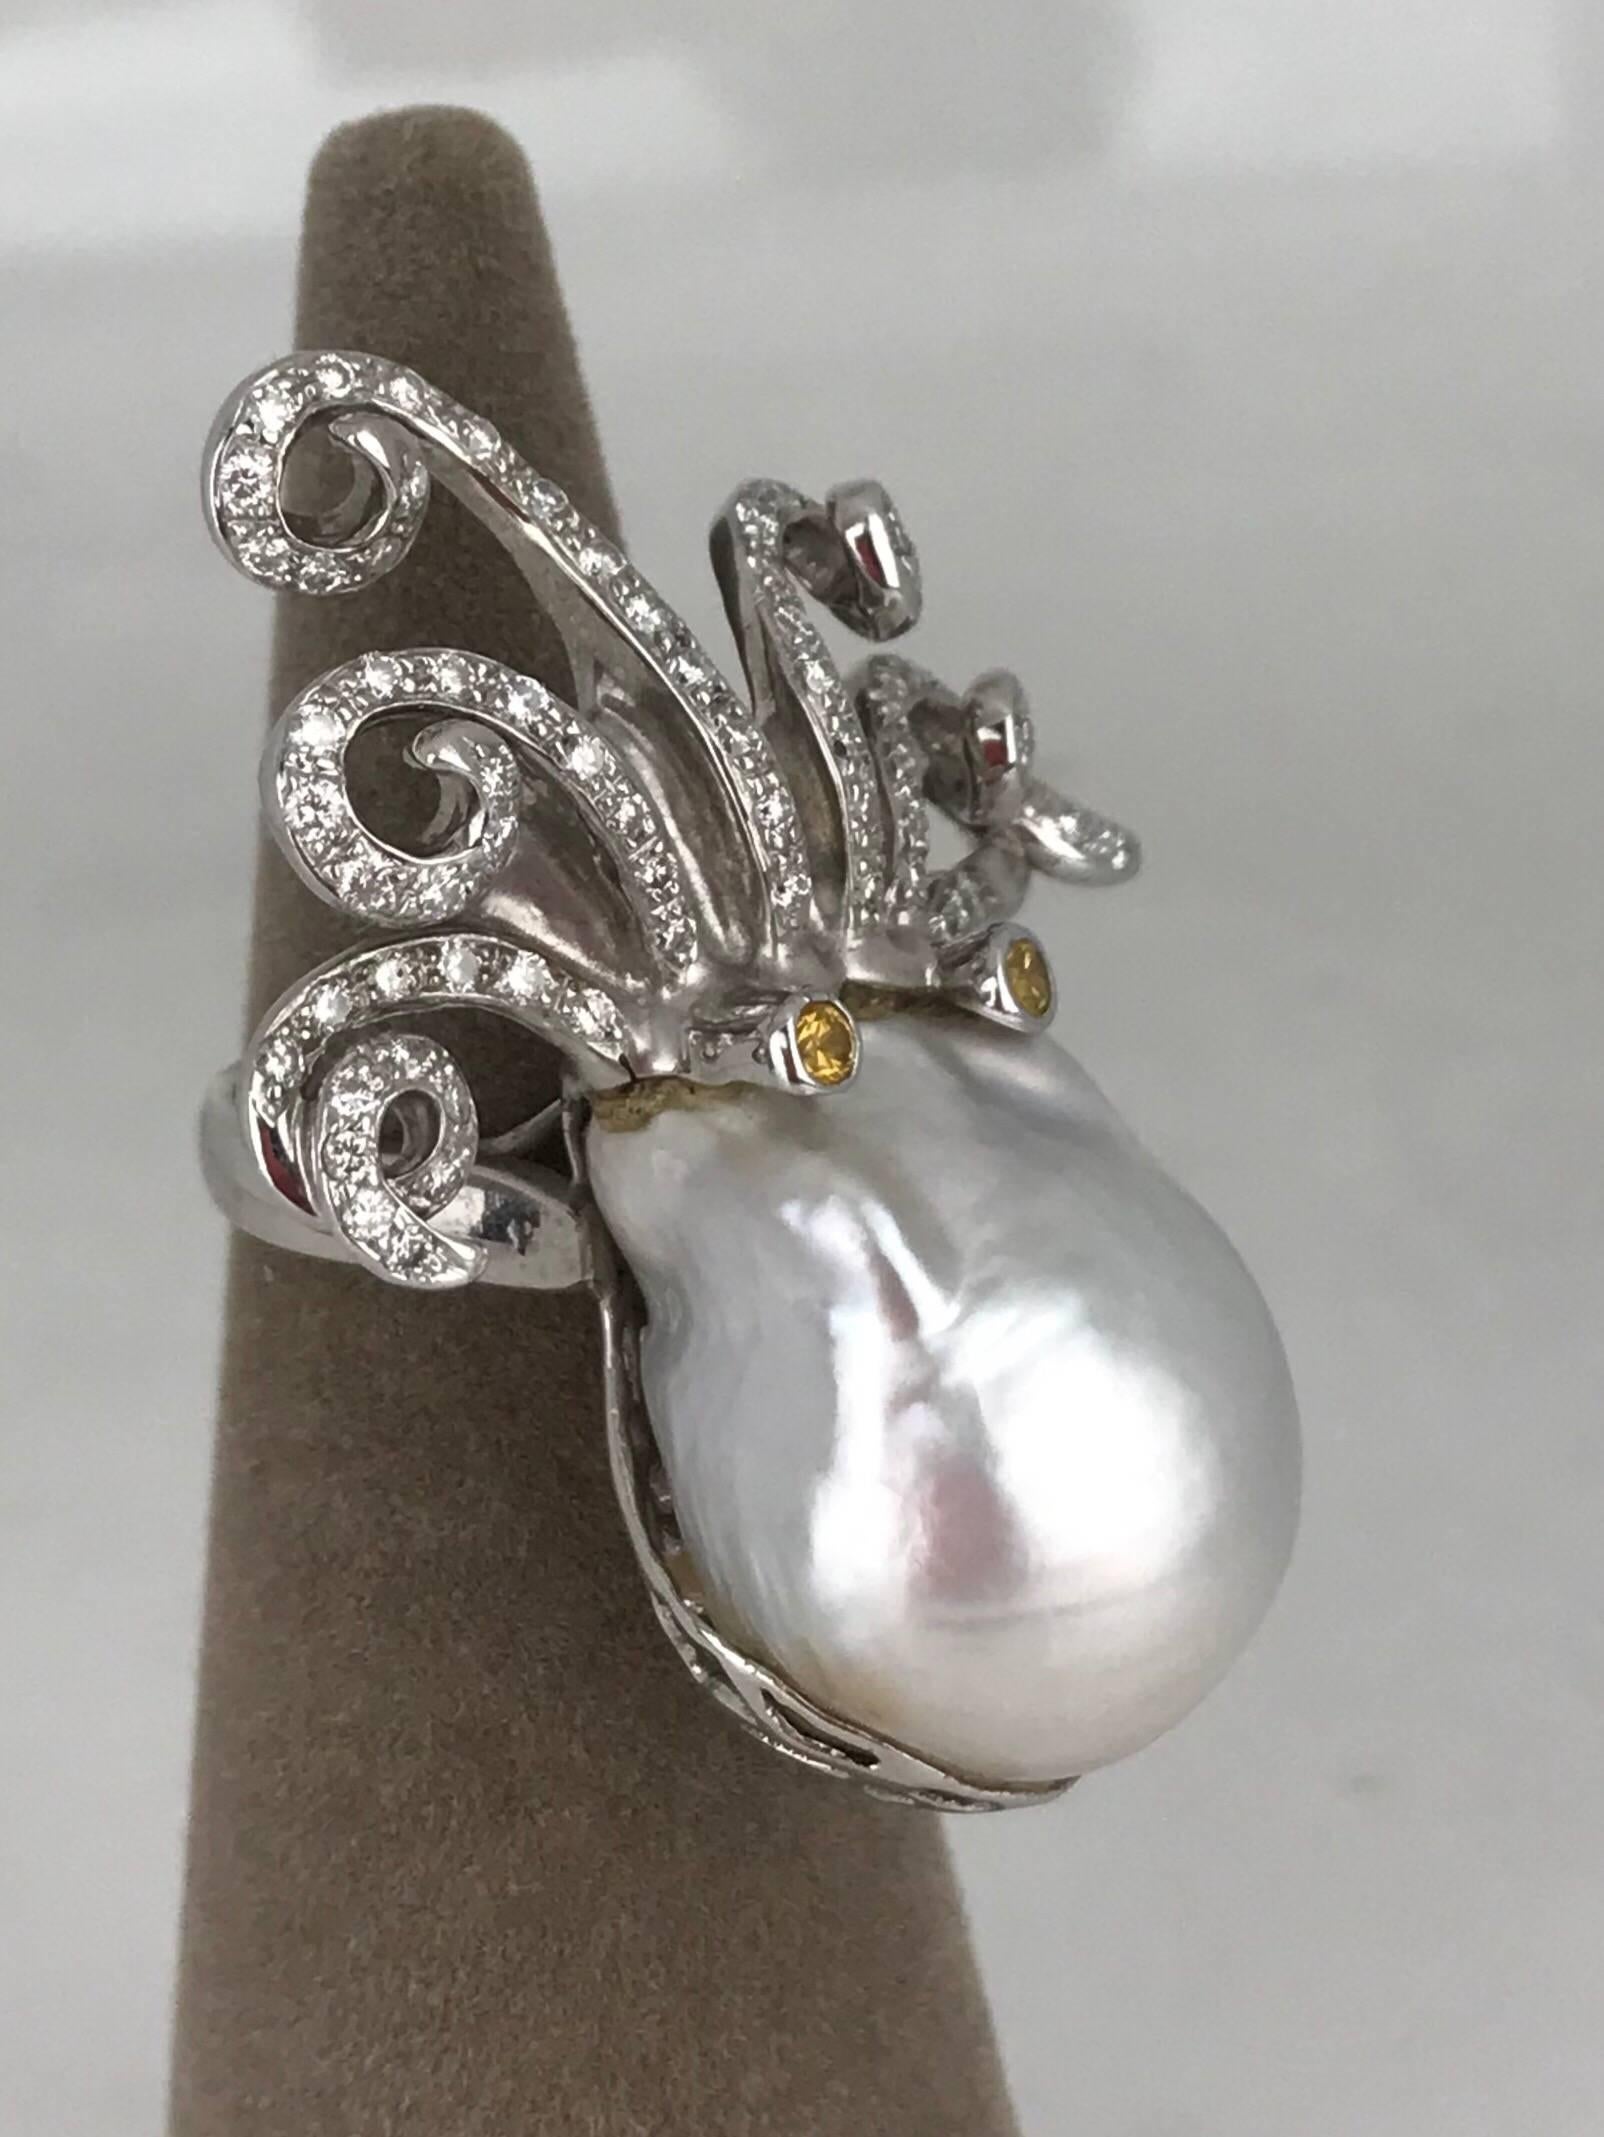 Octopus themed retro ring set in 18 Karat white Gold with an  18 X 24 MM large South Sea pearl featuring curled diamond tentacles and yellow sapphire eyes.

The Pearl measures 18 x 24 mm in diameter and has a high luster with white and silver